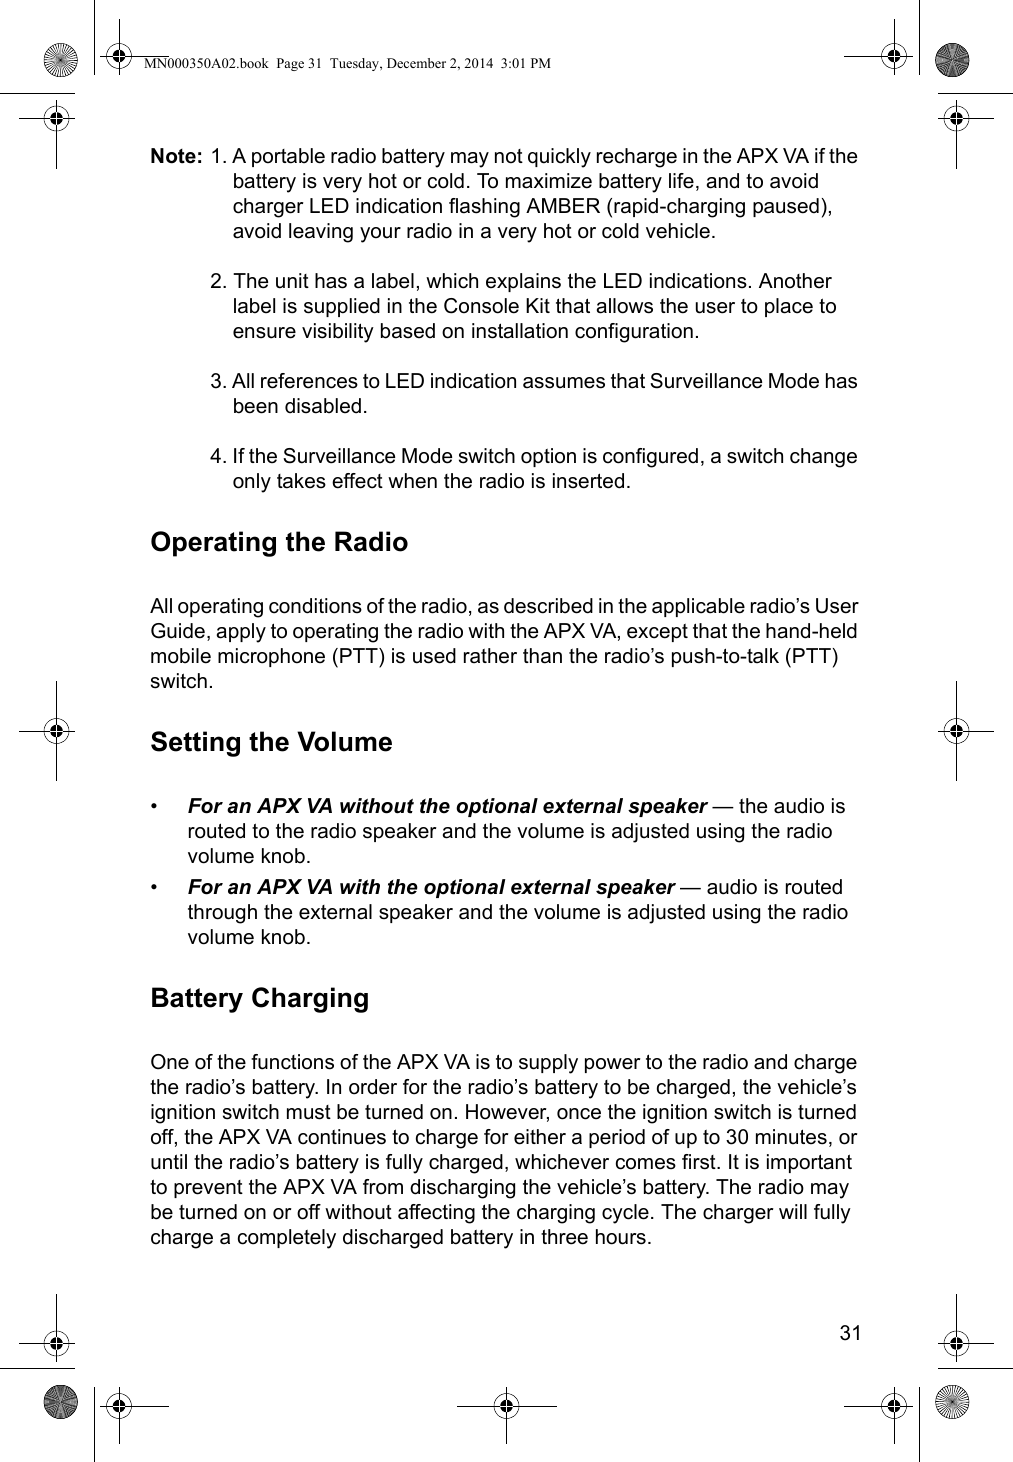 31Note: 1. A portable radio battery may not quickly recharge in the APX VA if the battery is very hot or cold. To maximize battery life, and to avoid charger LED indication flashing AMBER (rapid-charging paused), avoid leaving your radio in a very hot or cold vehicle.2. The unit has a label, which explains the LED indications. Another label is supplied in the Console Kit that allows the user to place to ensure visibility based on installation configuration.3. All references to LED indication assumes that Surveillance Mode has been disabled.4. If the Surveillance Mode switch option is configured, a switch change only takes effect when the radio is inserted. Operating the RadioAll operating conditions of the radio, as described in the applicable radio’s User Guide, apply to operating the radio with the APX VA, except that the hand-held mobile microphone (PTT) is used rather than the radio’s push-to-talk (PTT) switch.Setting the Volume•For an APX VA without the optional external speaker — the audio is routed to the radio speaker and the volume is adjusted using the radio volume knob. •For an APX VA with the optional external speaker — audio is routed through the external speaker and the volume is adjusted using the radio volume knob.Battery ChargingOne of the functions of the APX VA is to supply power to the radio and charge the radio’s battery. In order for the radio’s battery to be charged, the vehicle’s ignition switch must be turned on. However, once the ignition switch is turned off, the APX VA continues to charge for either a period of up to 30 minutes, or until the radio’s battery is fully charged, whichever comes first. It is important to prevent the APX VA from discharging the vehicle’s battery. The radio may be turned on or off without affecting the charging cycle. The charger will fully charge a completely discharged battery in three hours.MN000350A02.book  Page 31  Tuesday, December 2, 2014  3:01 PM